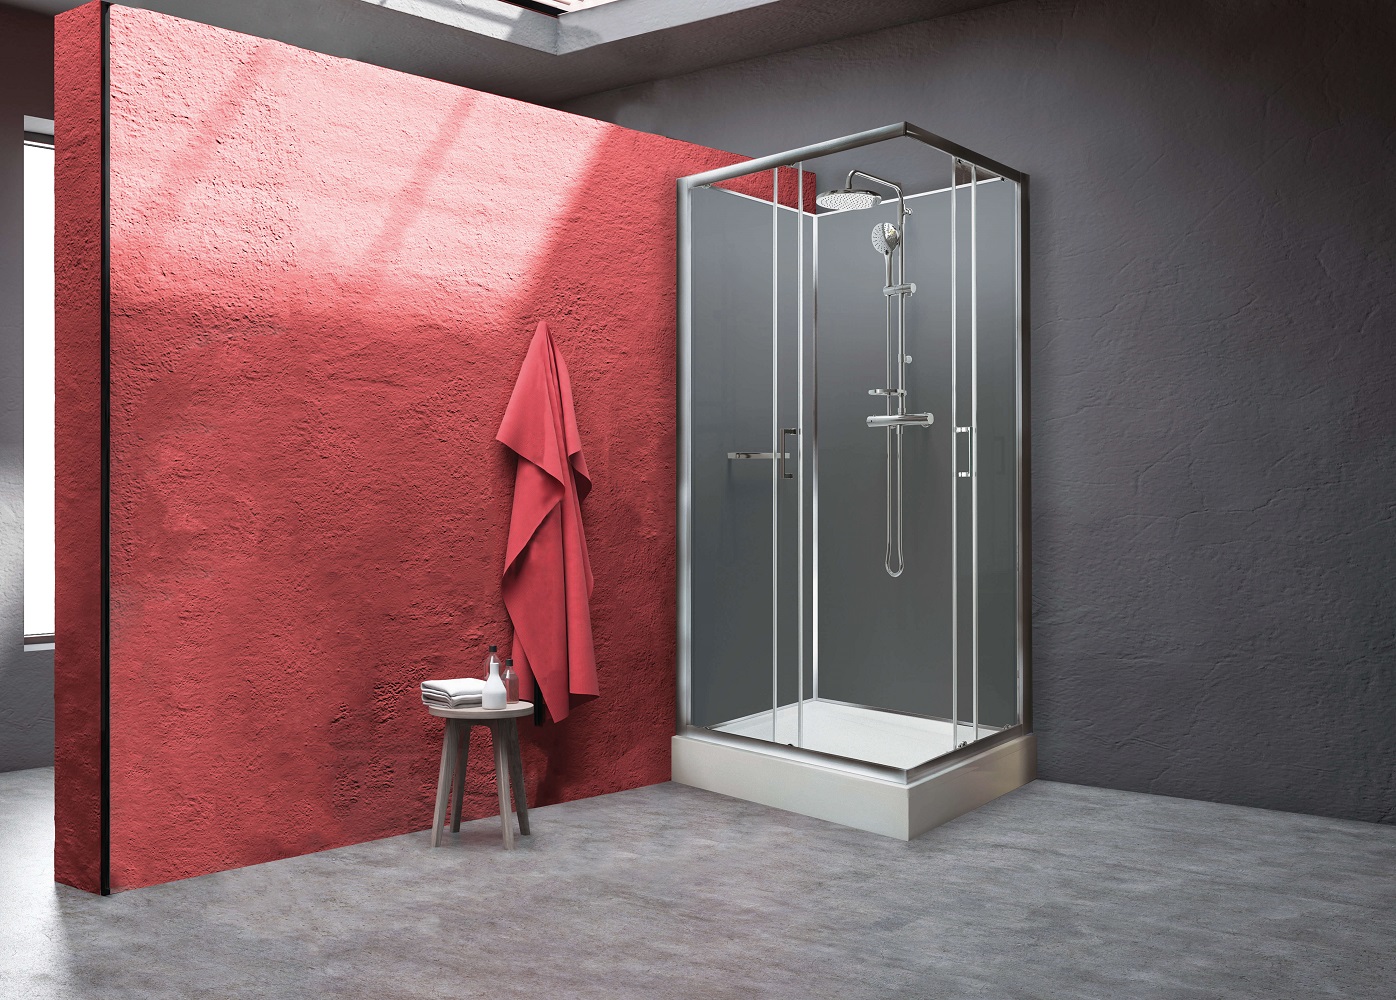 Smart Solutions is a response to the need to adjust the elements of the shower area